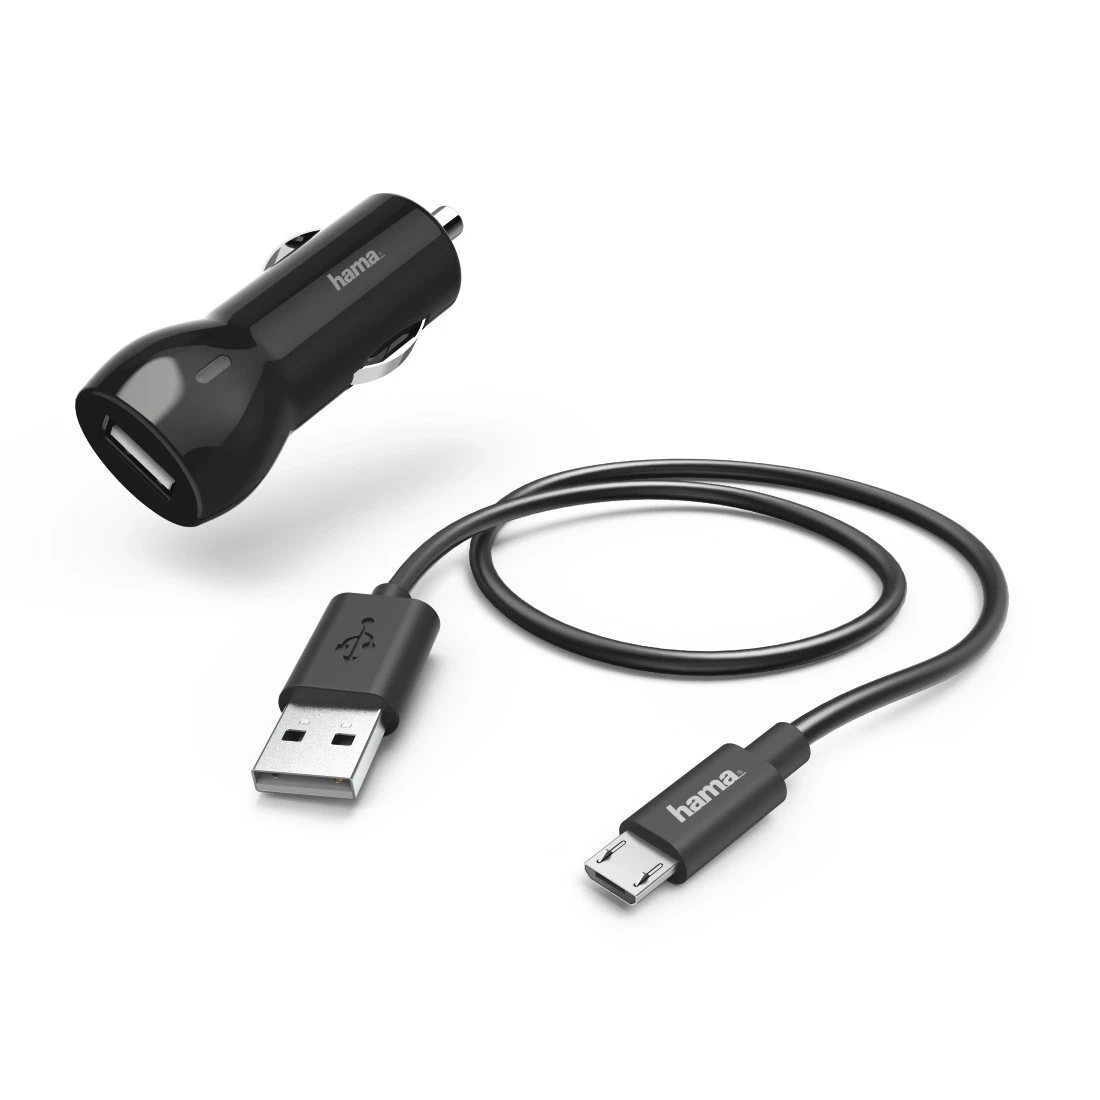 Kit charge allume cigare, micro-USB, 2,4 A, noir